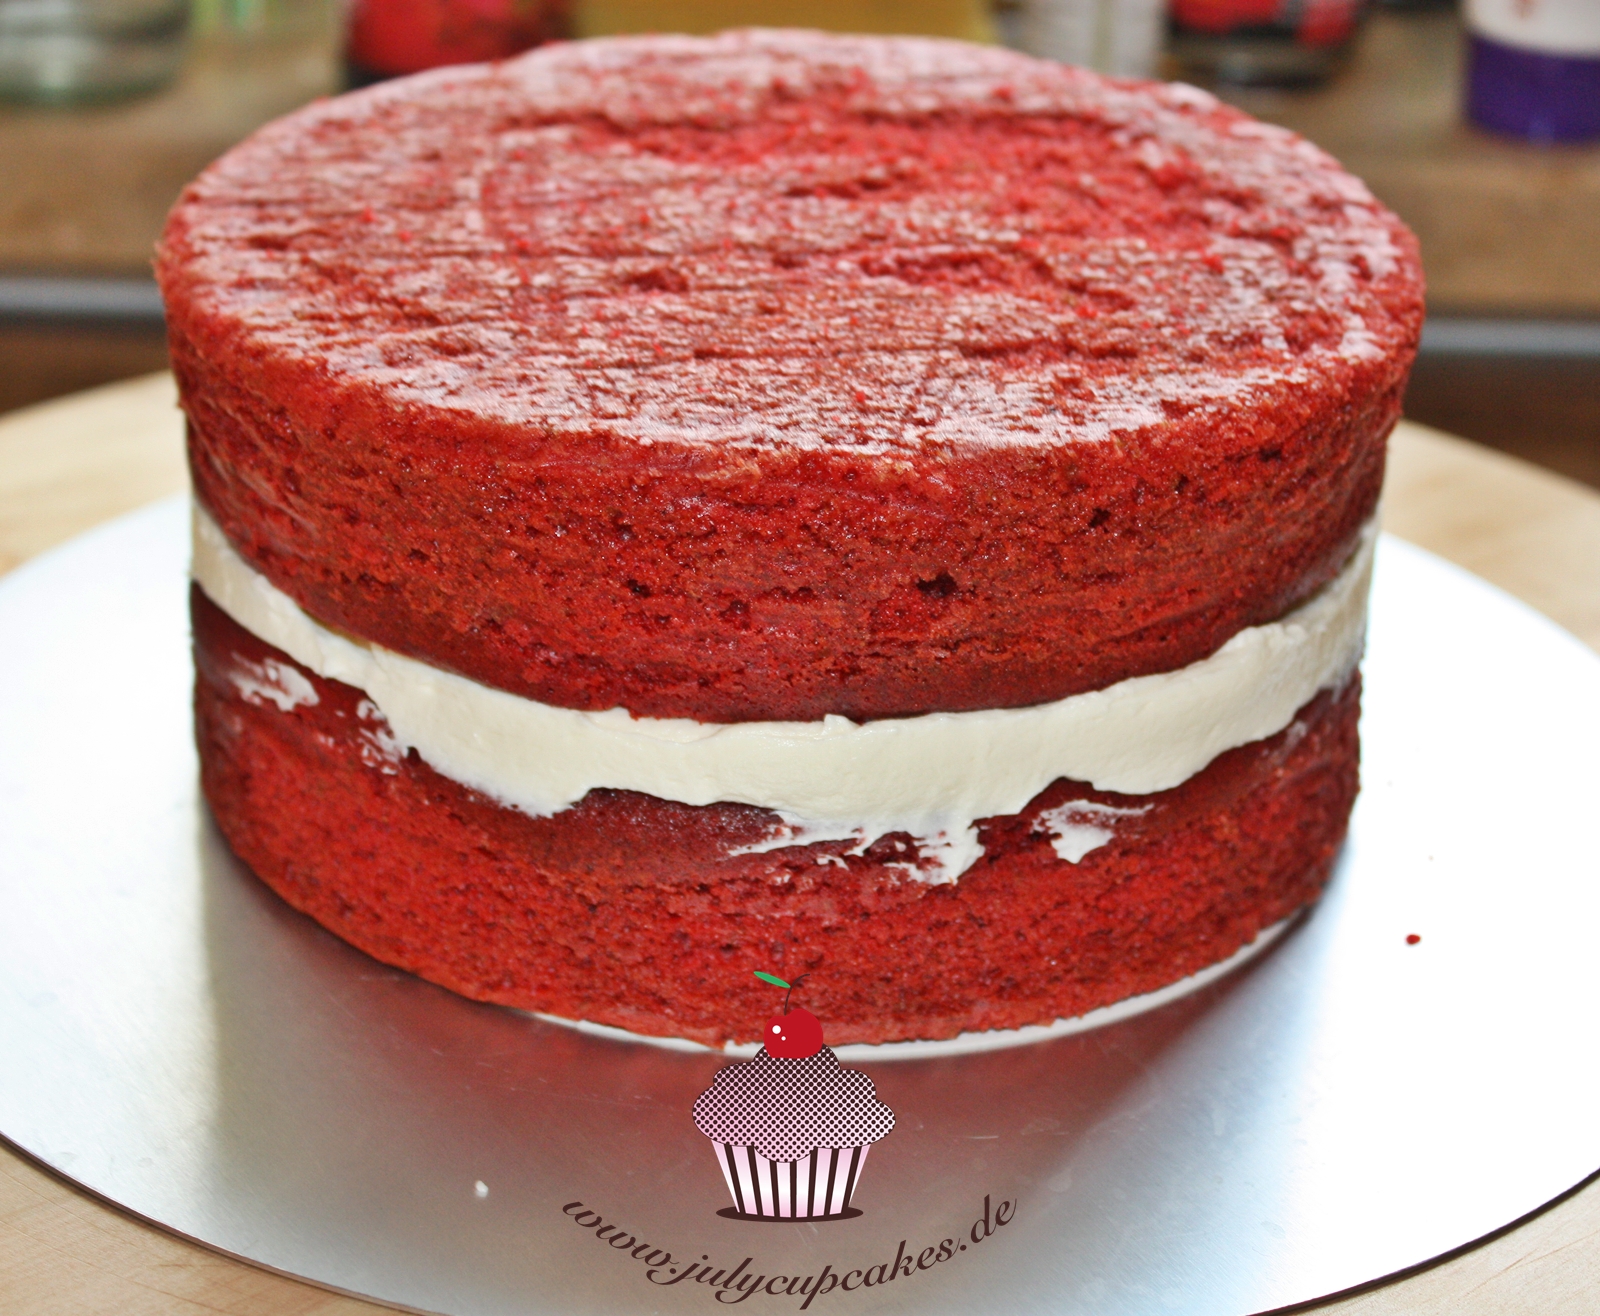 Red velvet cake with cream cheese frosting.